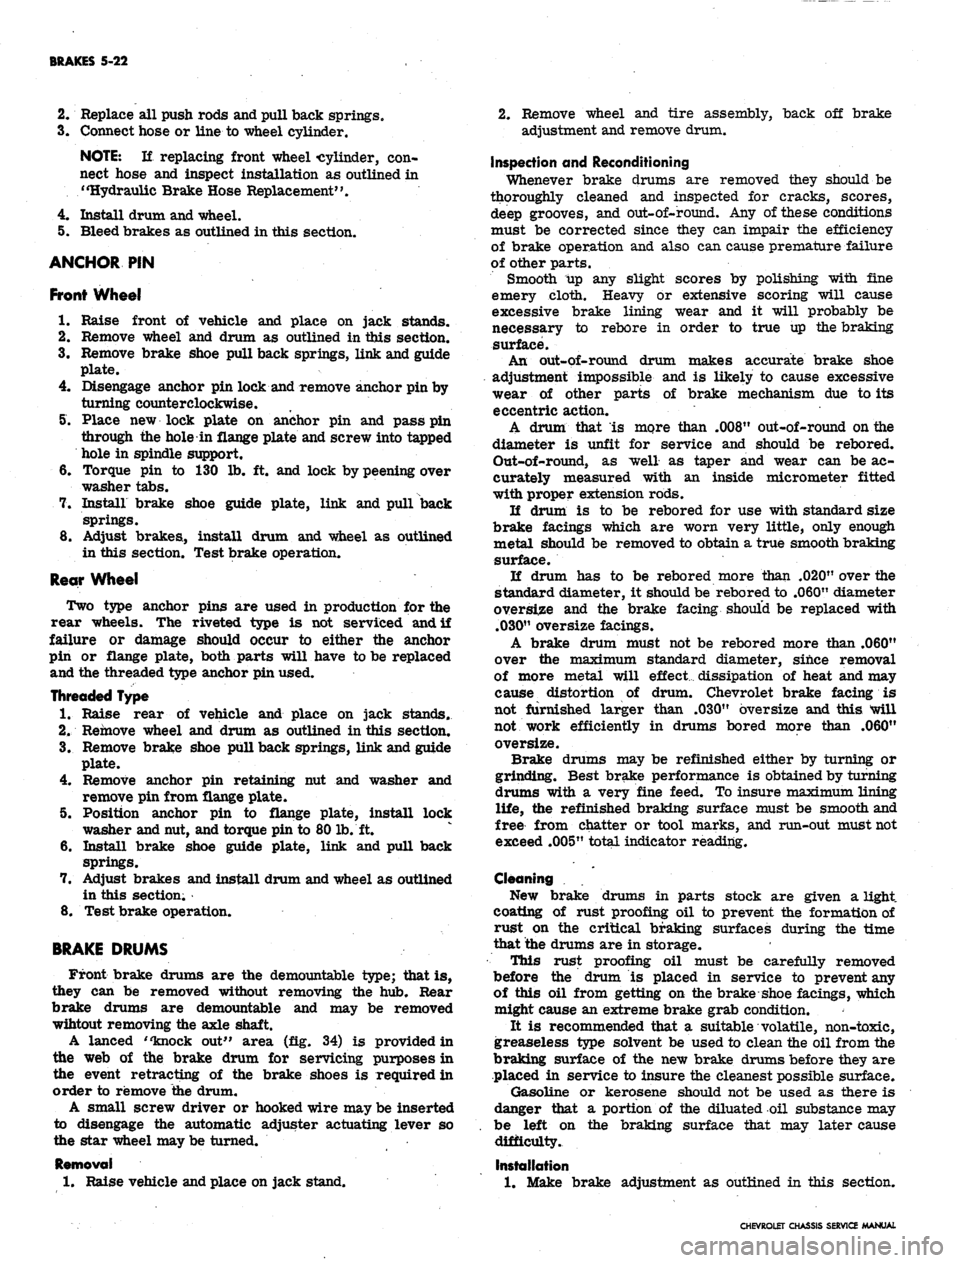 CHEVROLET CAMARO 1967 1.G Chassis Service Manual 
BRAKES 5-22

2.
 Replace ail push rods and pull back springs.

3.
 Connect hose or line to wheel cylinder.

NOTE:
 If replacing front wheel cylinder, con-

nect hose and inspect installation as outli